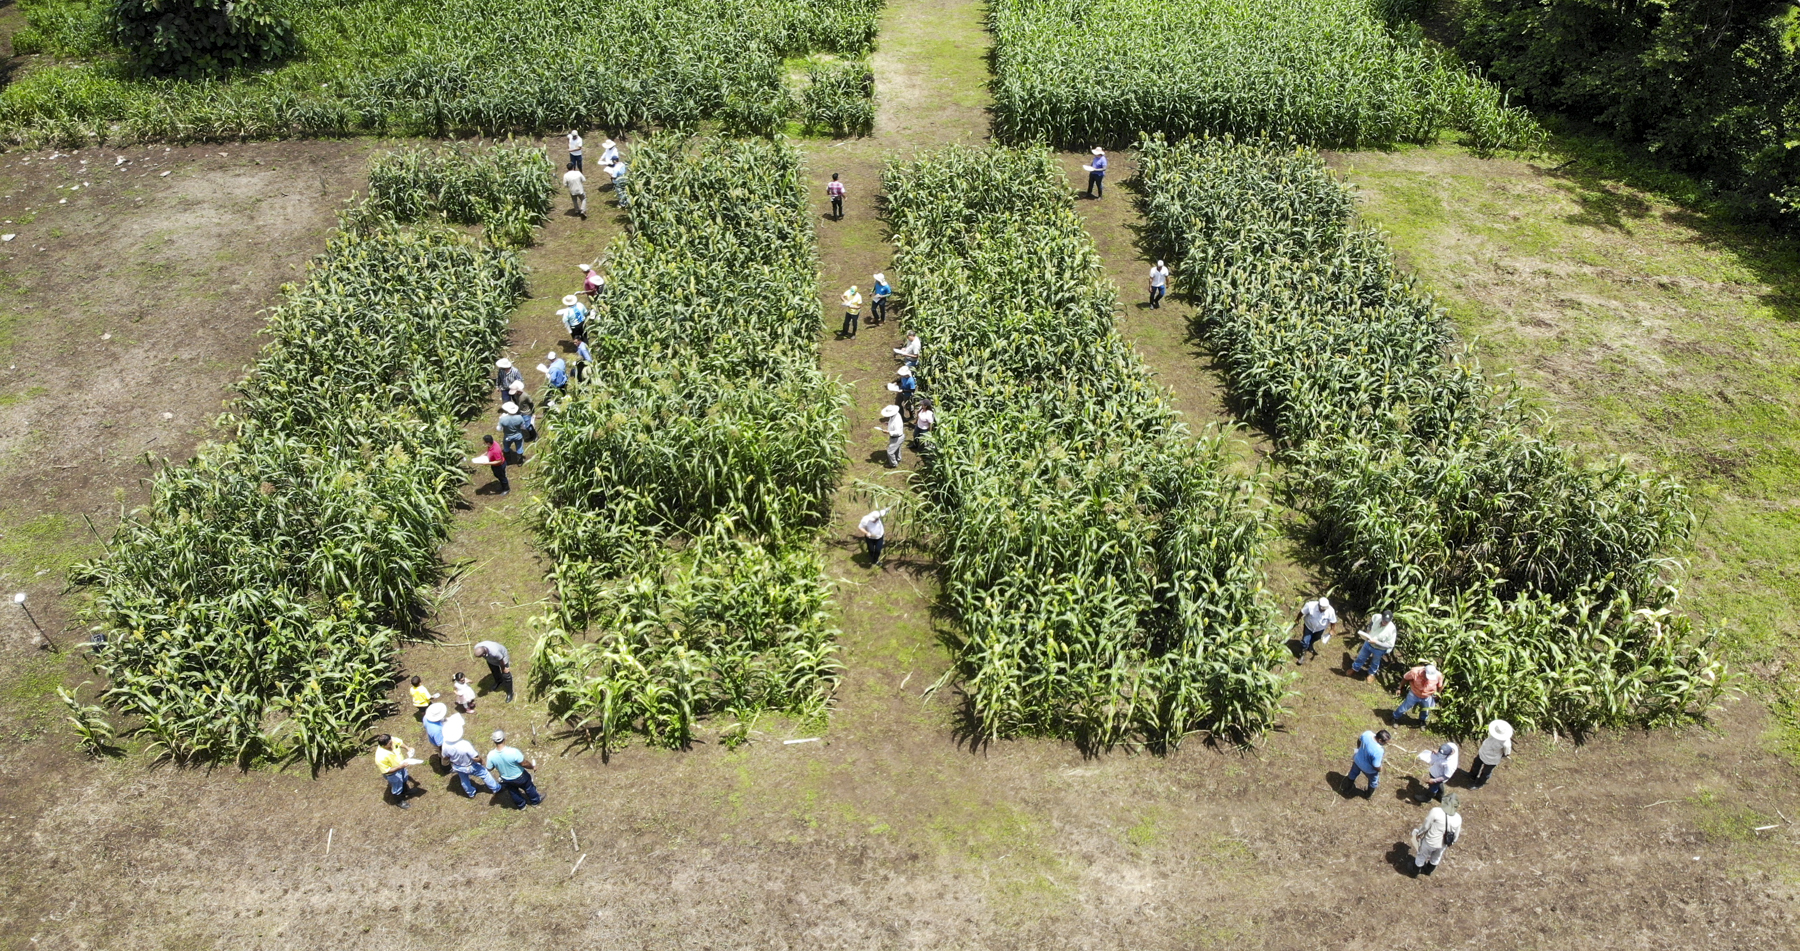 Collaboration across borders: experts from Central America and the Caribbean explore regional crop improvement network